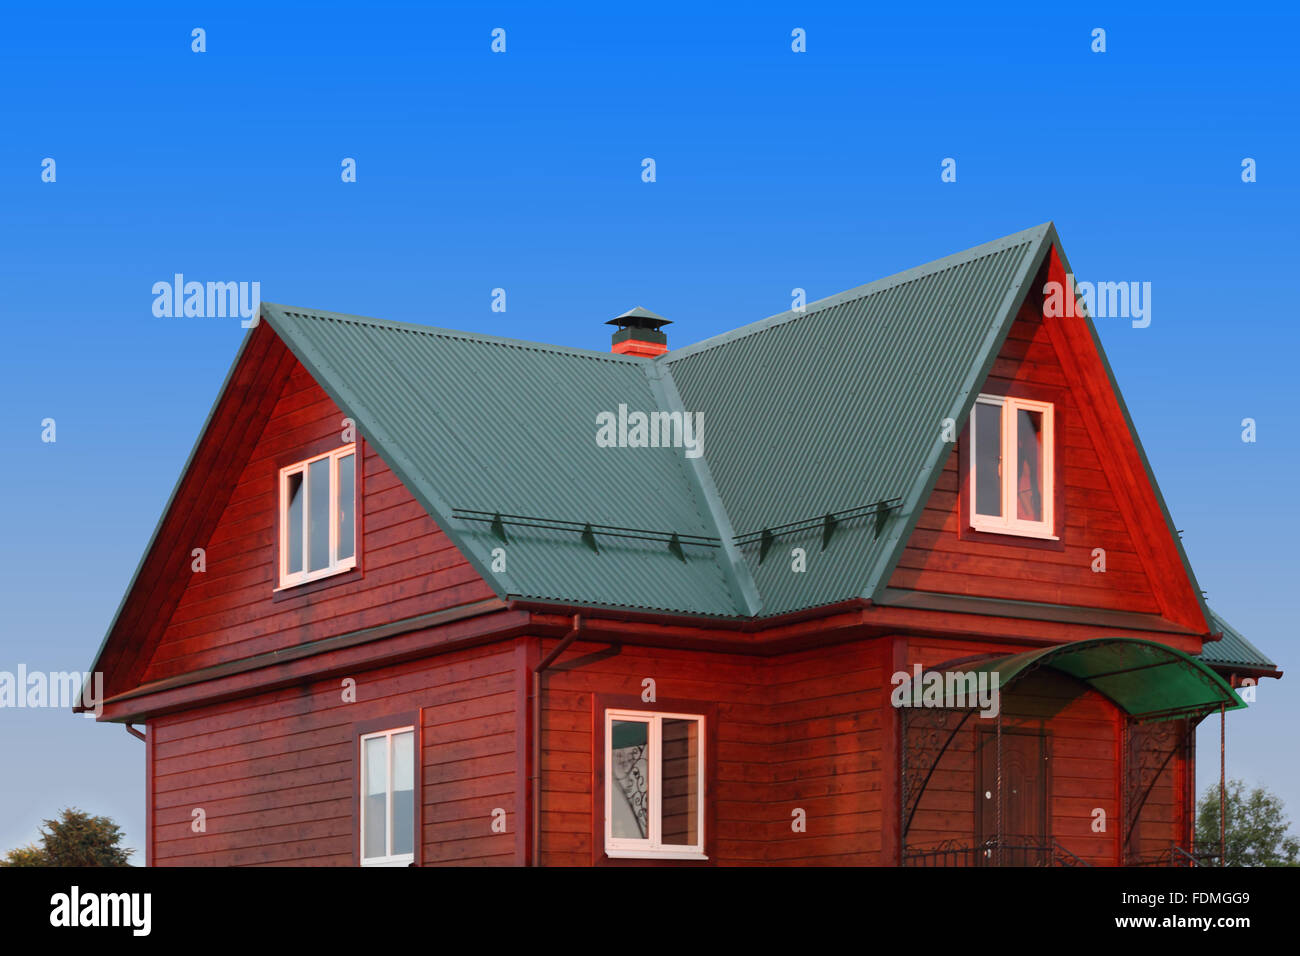 Wooden house under green metal roof with white plastic windows photo Stock Photo